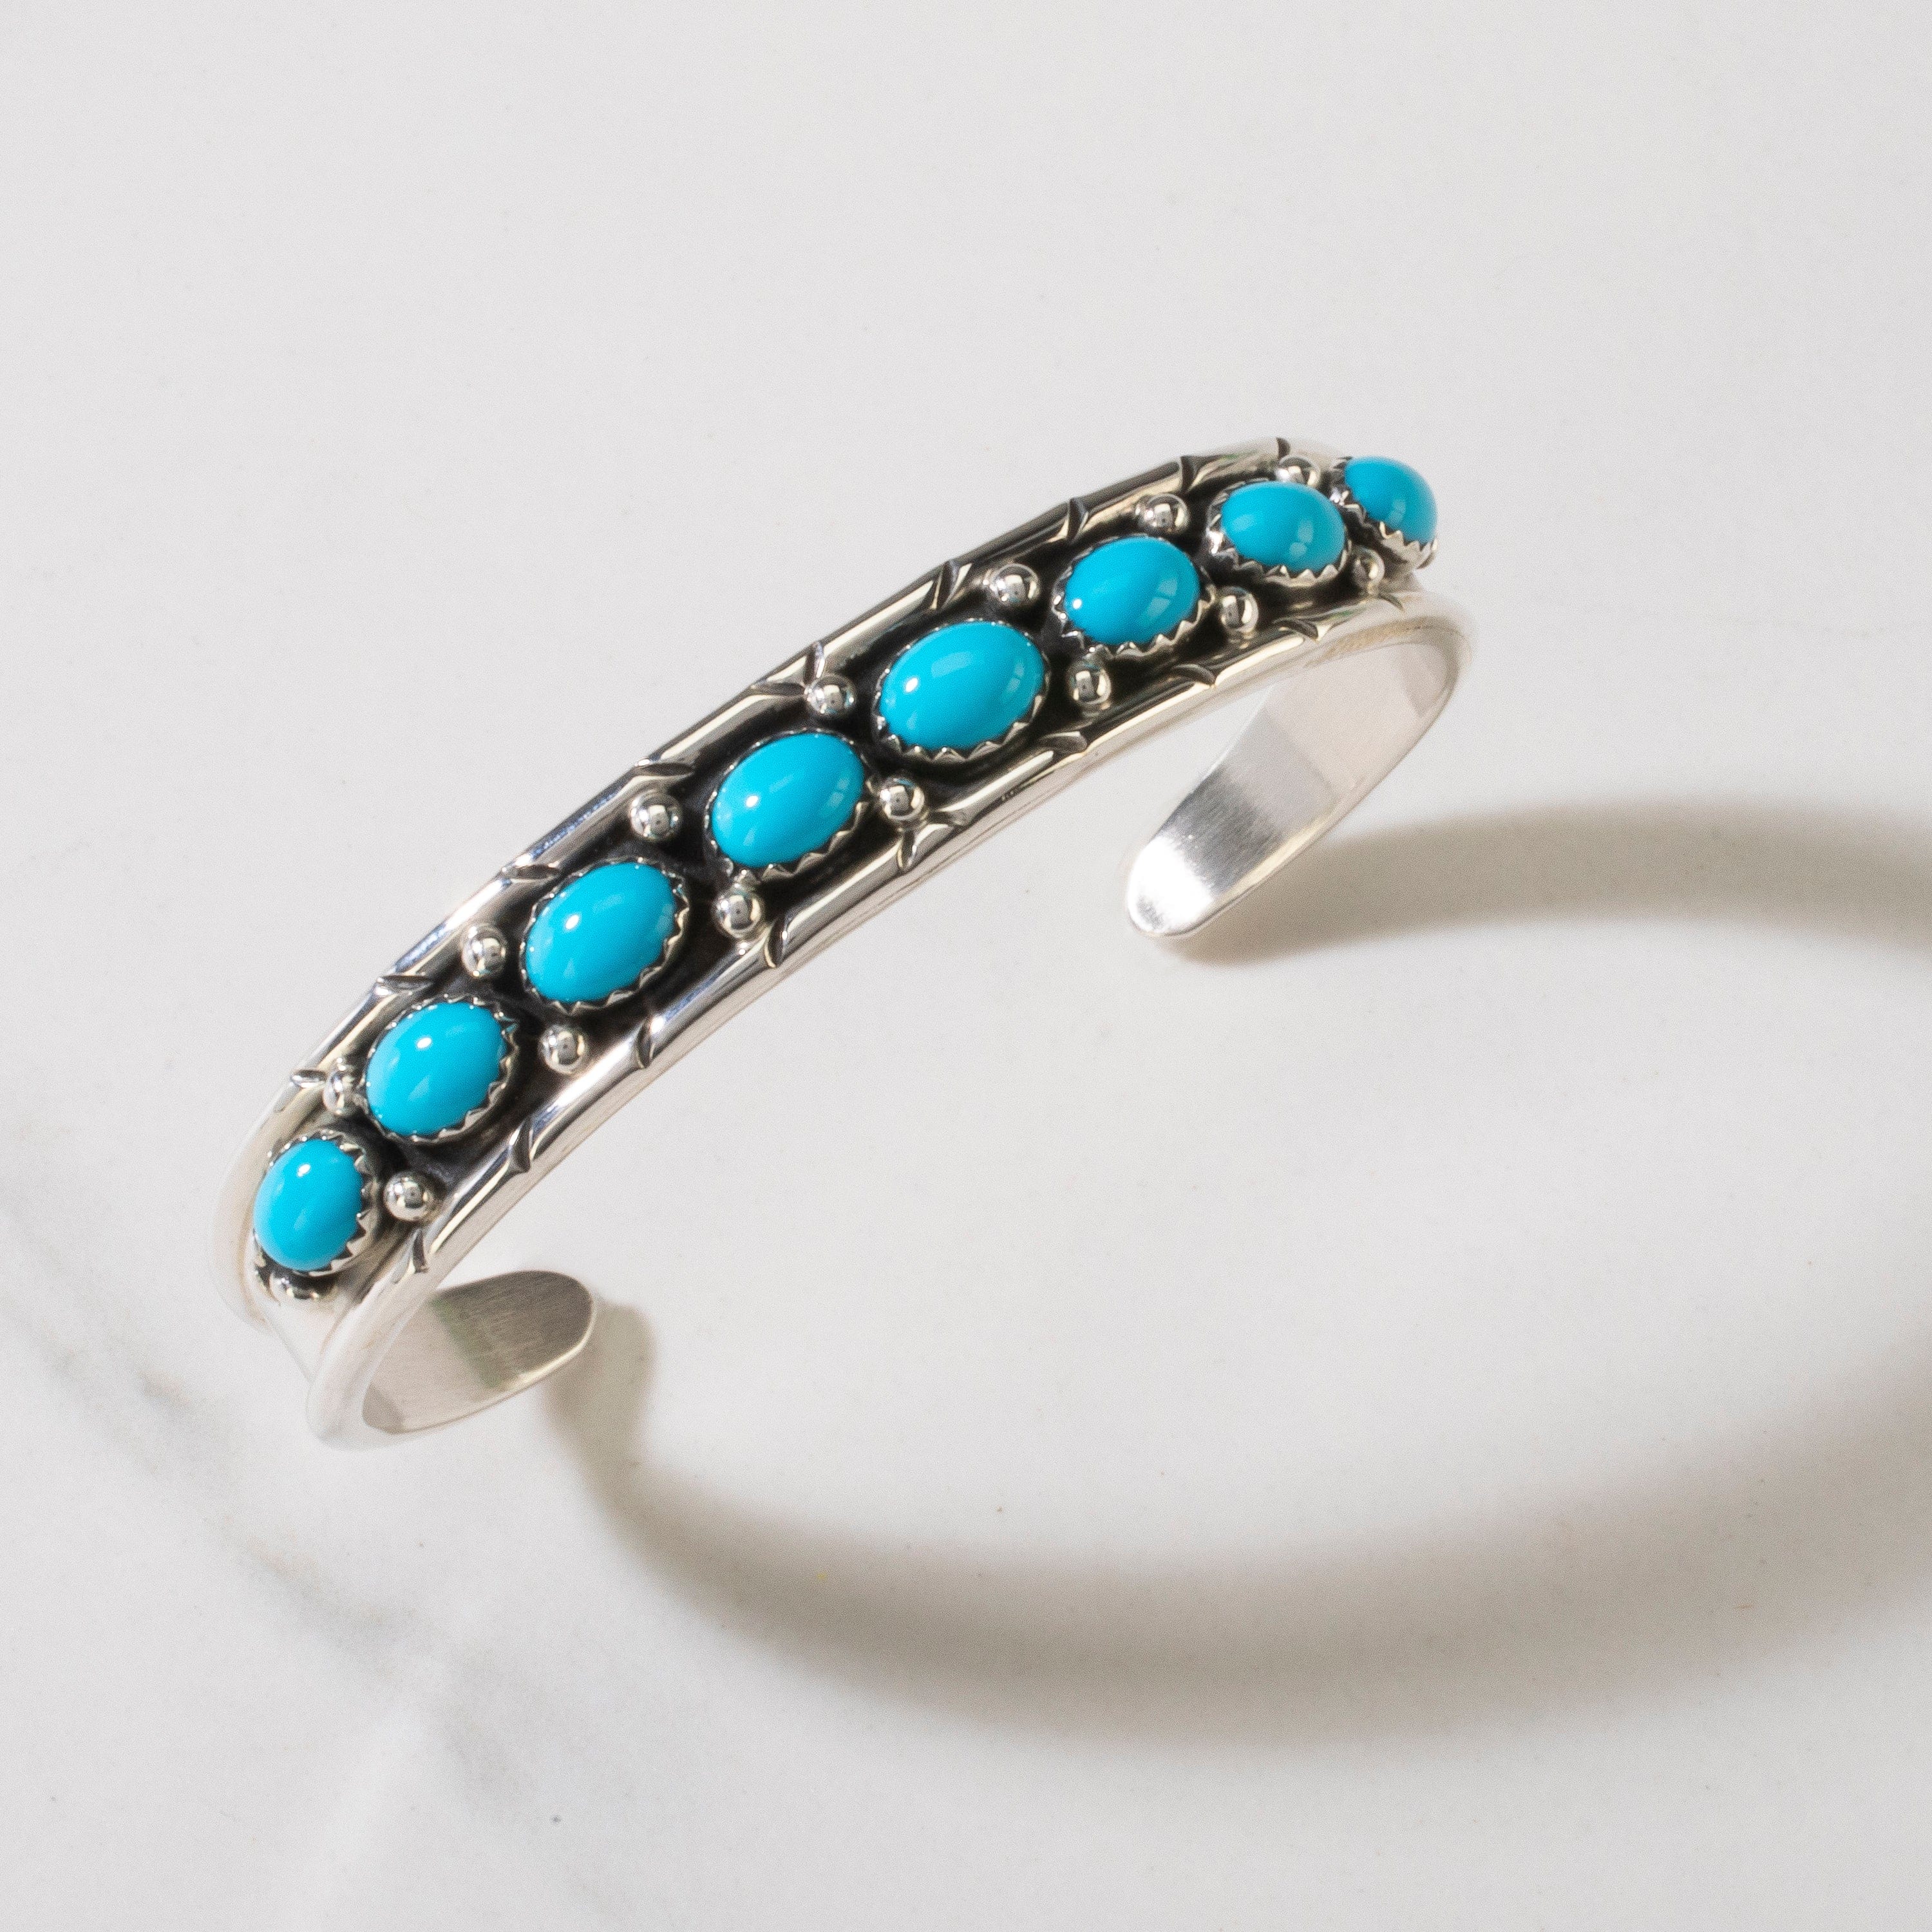 Kalifano Native American Jewelry Russell Sam Sleeping Beauty Turquoise Navajo USA Native American Made 925 Sterling Silver Cuff NAB900.032